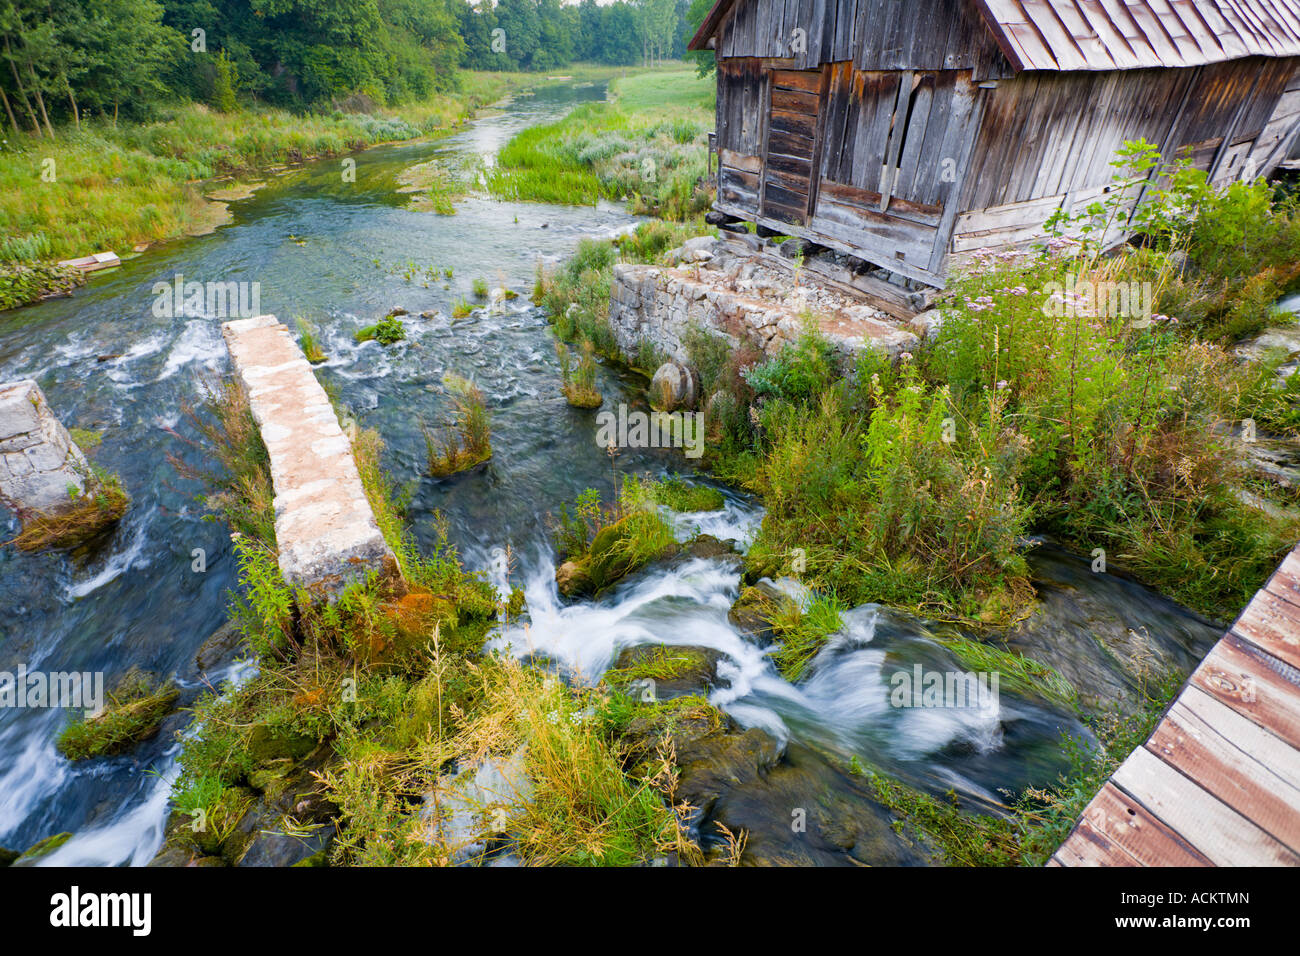 Gacka river source, remains of old mill Croatia, Europe Stock Photo